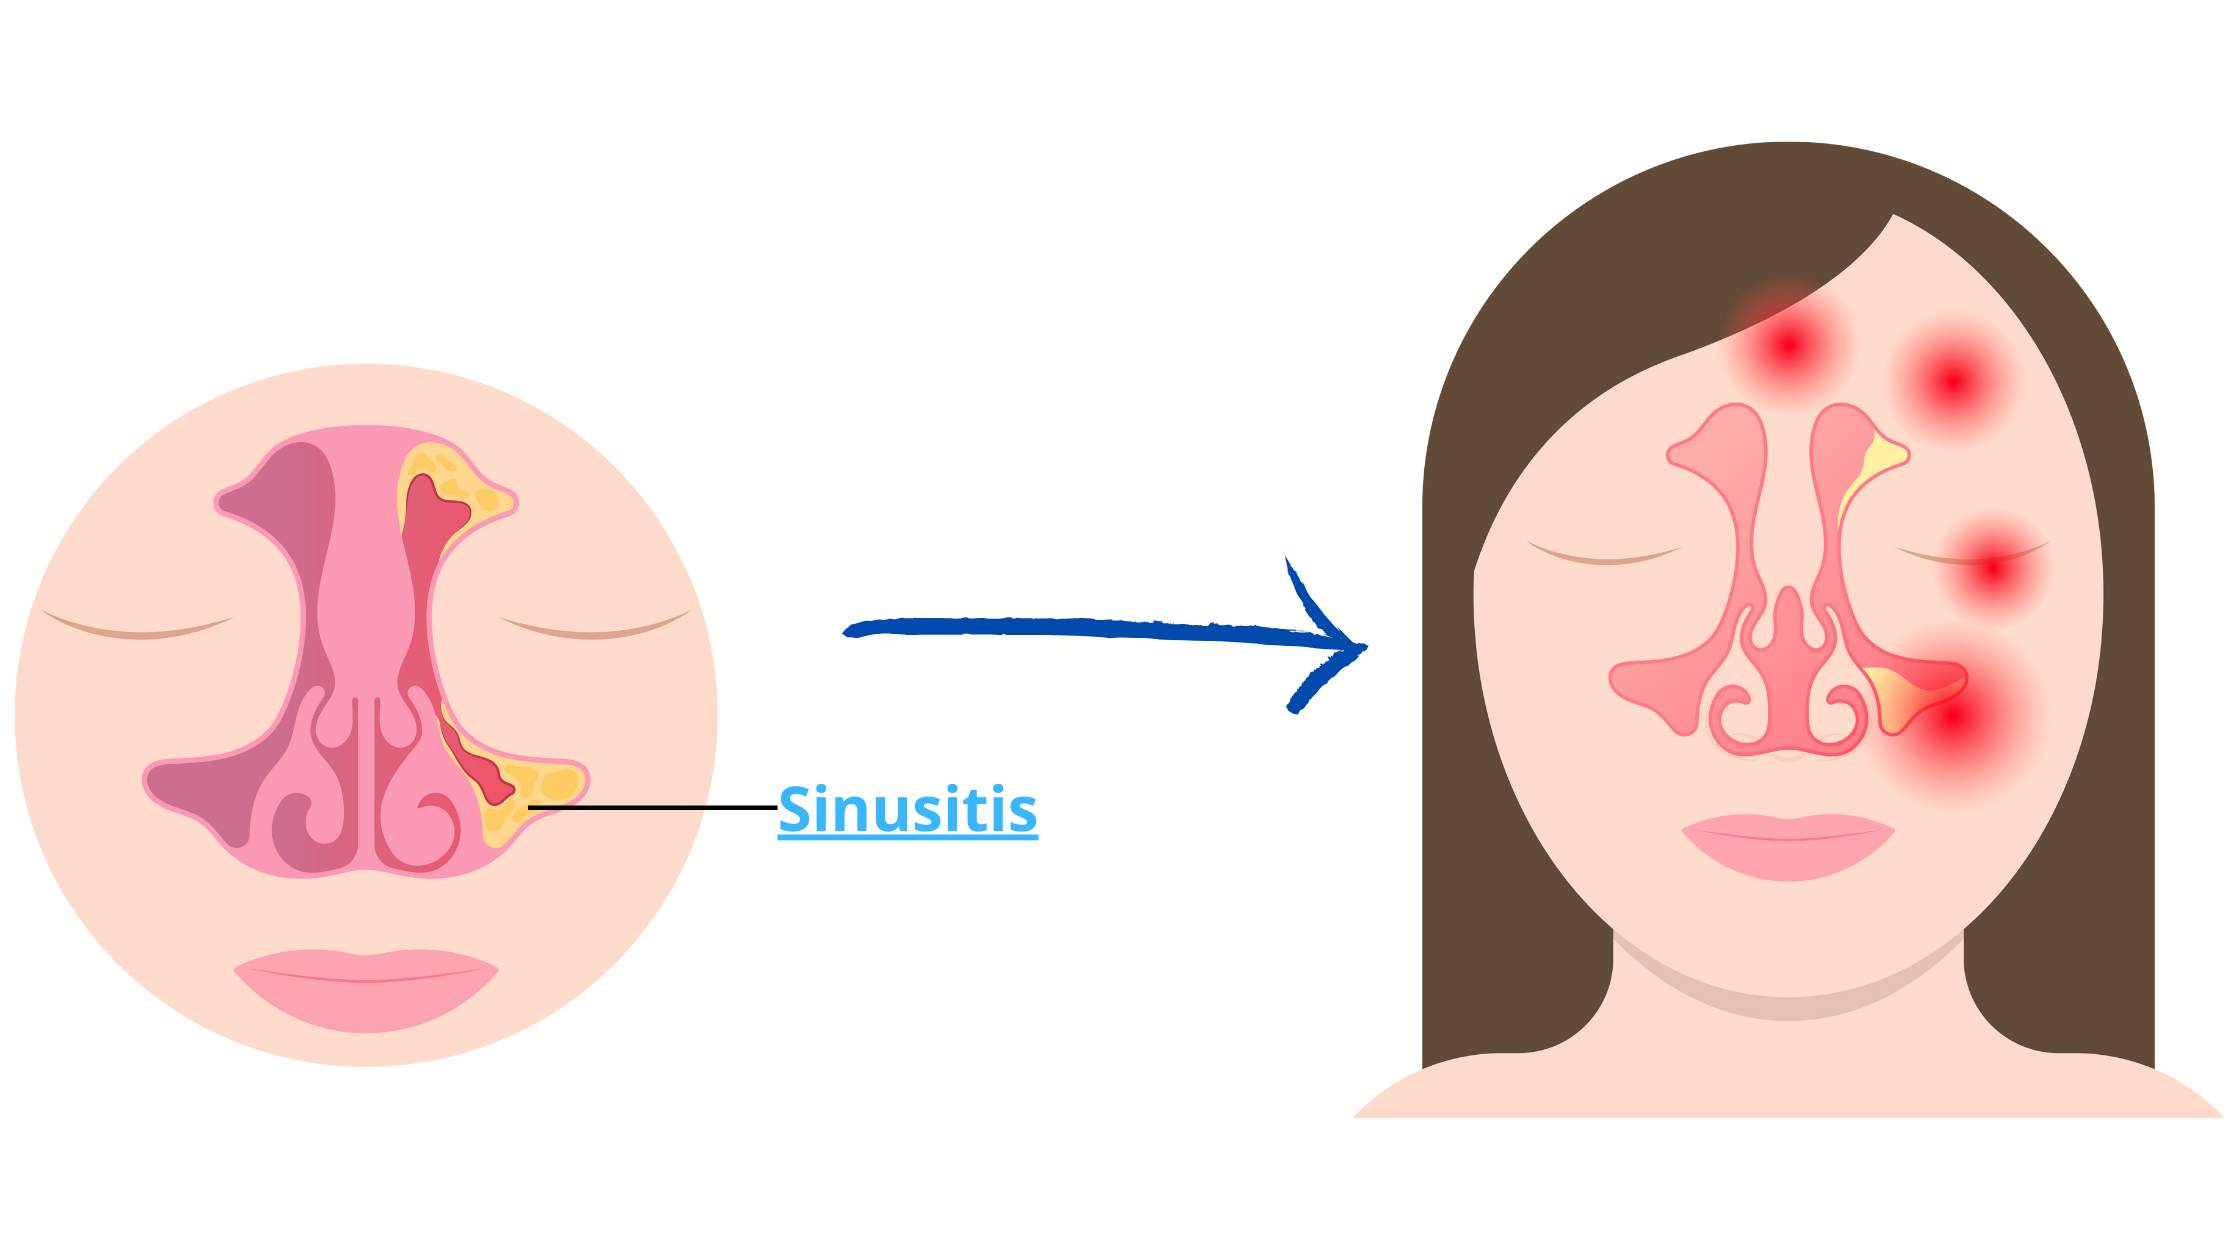 Sinusitis pain can spread to other areas of the face, including the upper jaw, eyes and forehead 